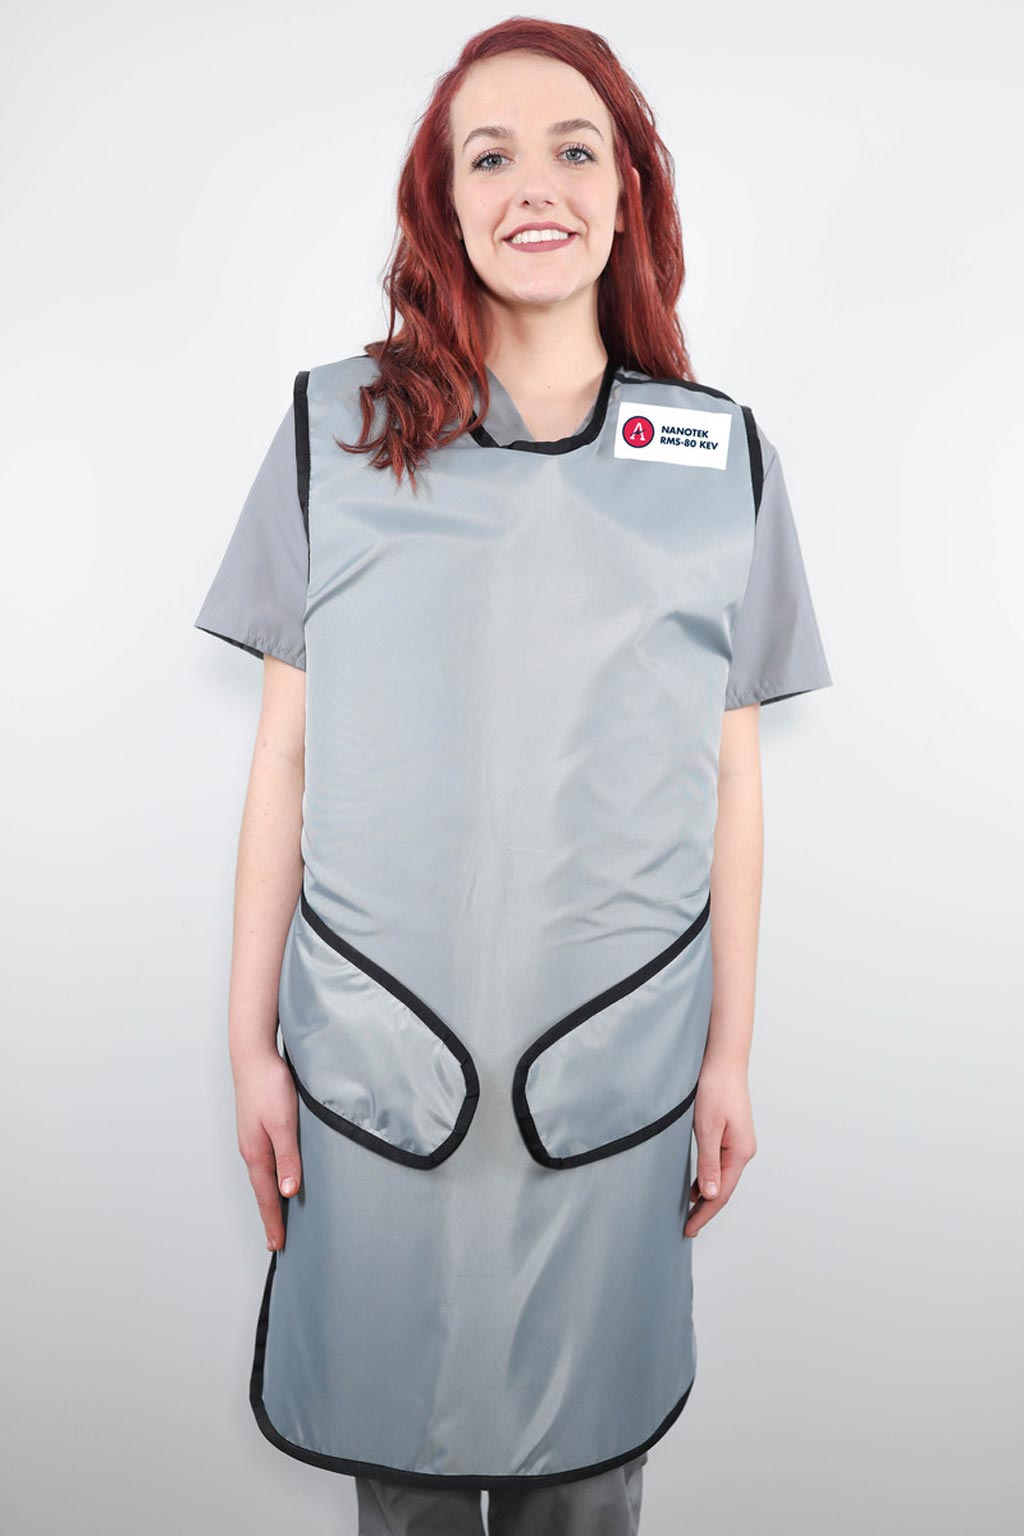 Image: The NanoTek x-ray apron uses polymers instead of lead (Photo courtesy of Artemis Shielding).